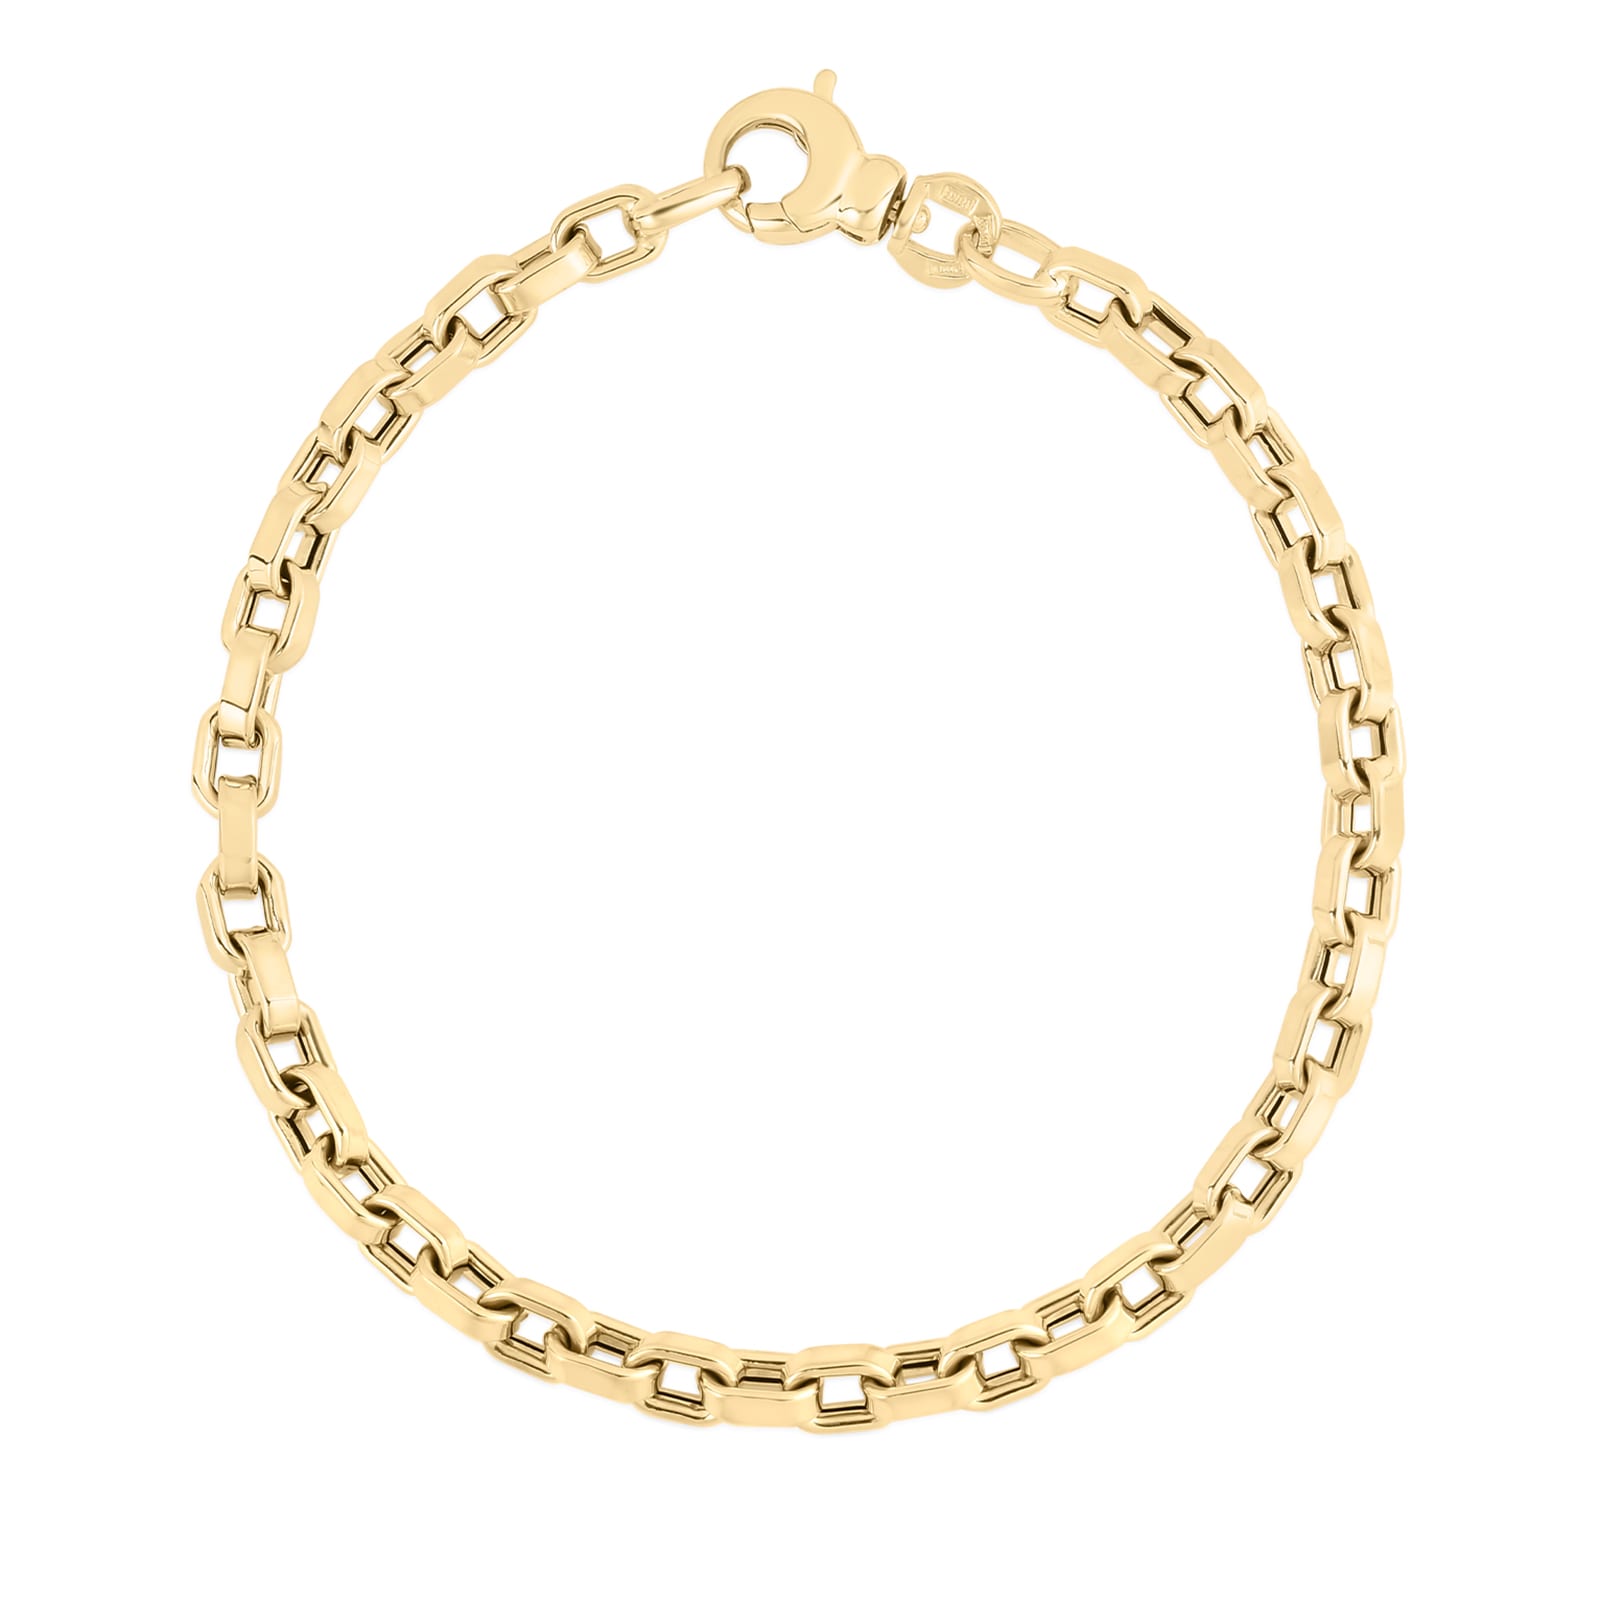 Roberto Coin 18K Yellow Gold Thicker Square Link Bracelet